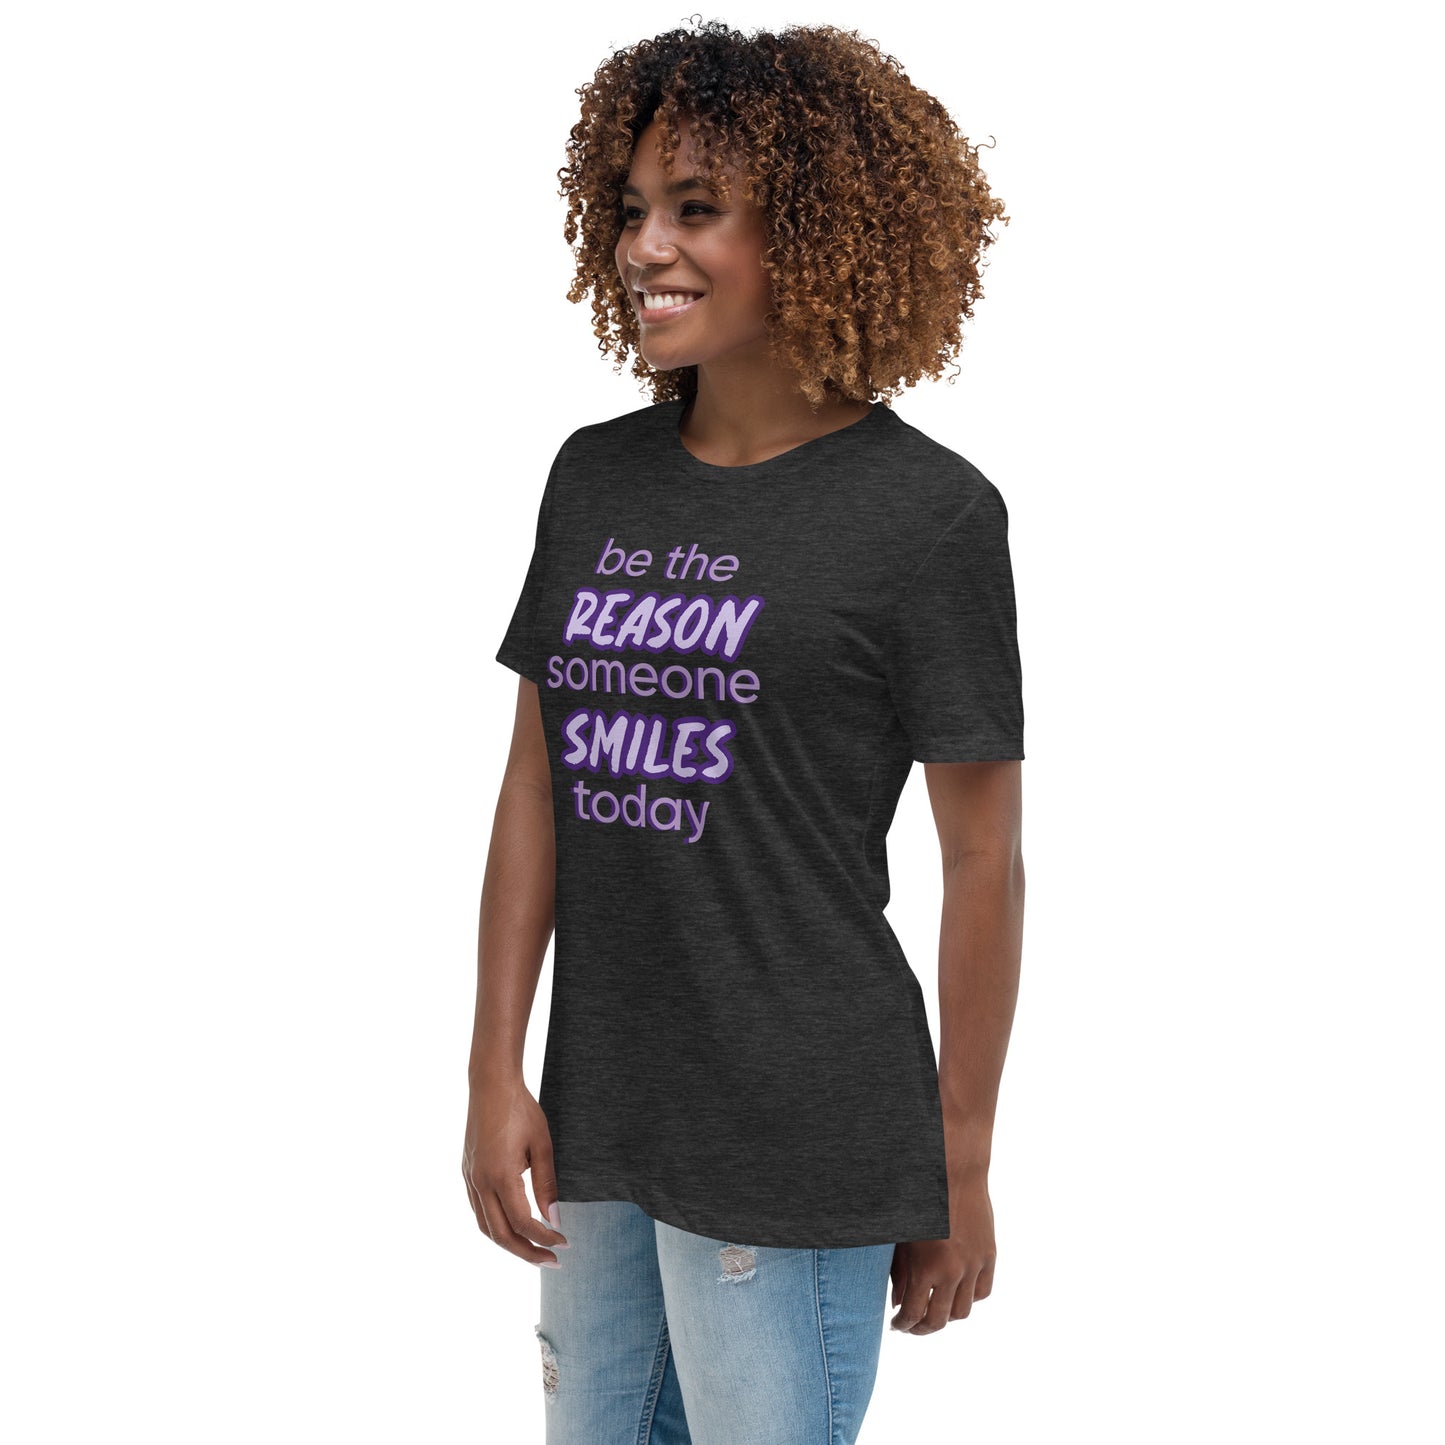 Woman with dark grey T-shirt and the quote "be the reason someone smiles today" in purple on it. 